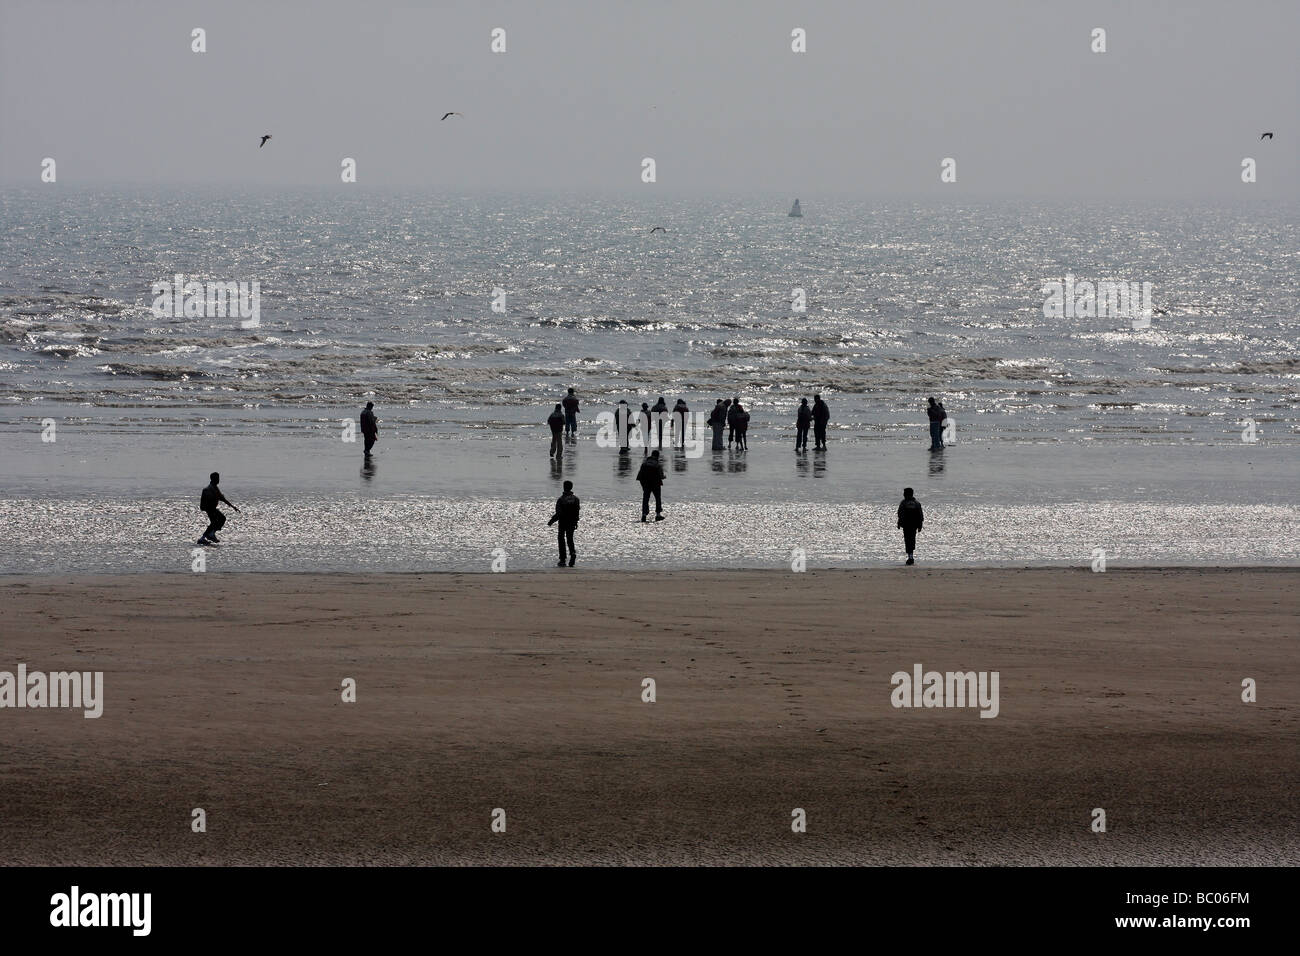 Large group of people in silhouette at the sea edge at low tide in bright sun. Stock Photo